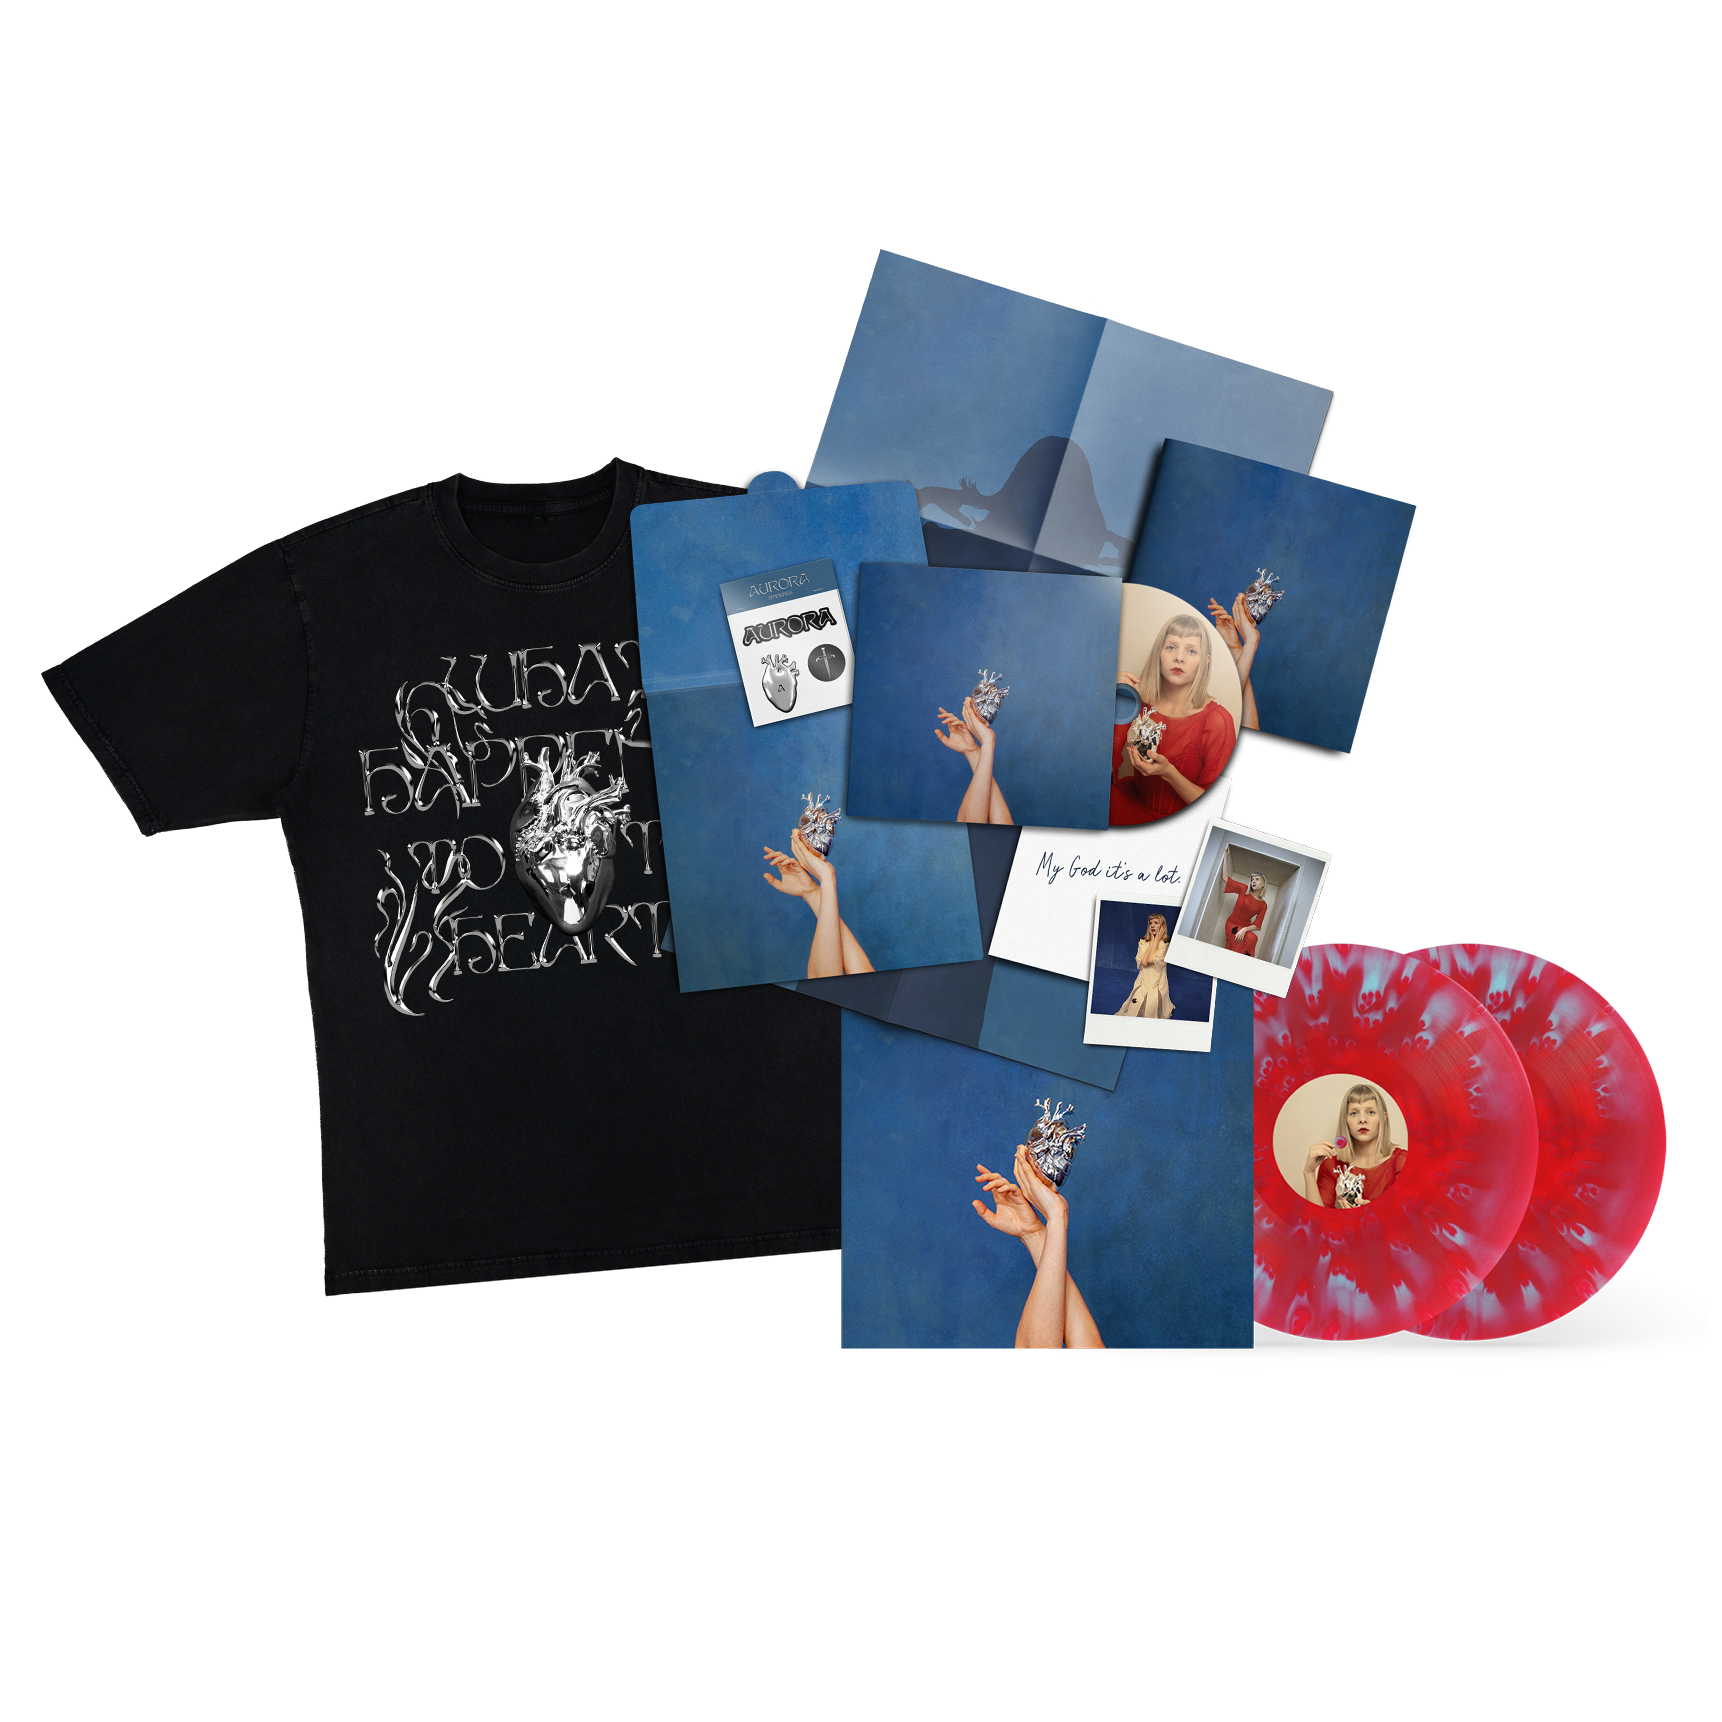 What Happened To The Heart? Exclusive Fanpack, Exclusive 2LP & T-shirt